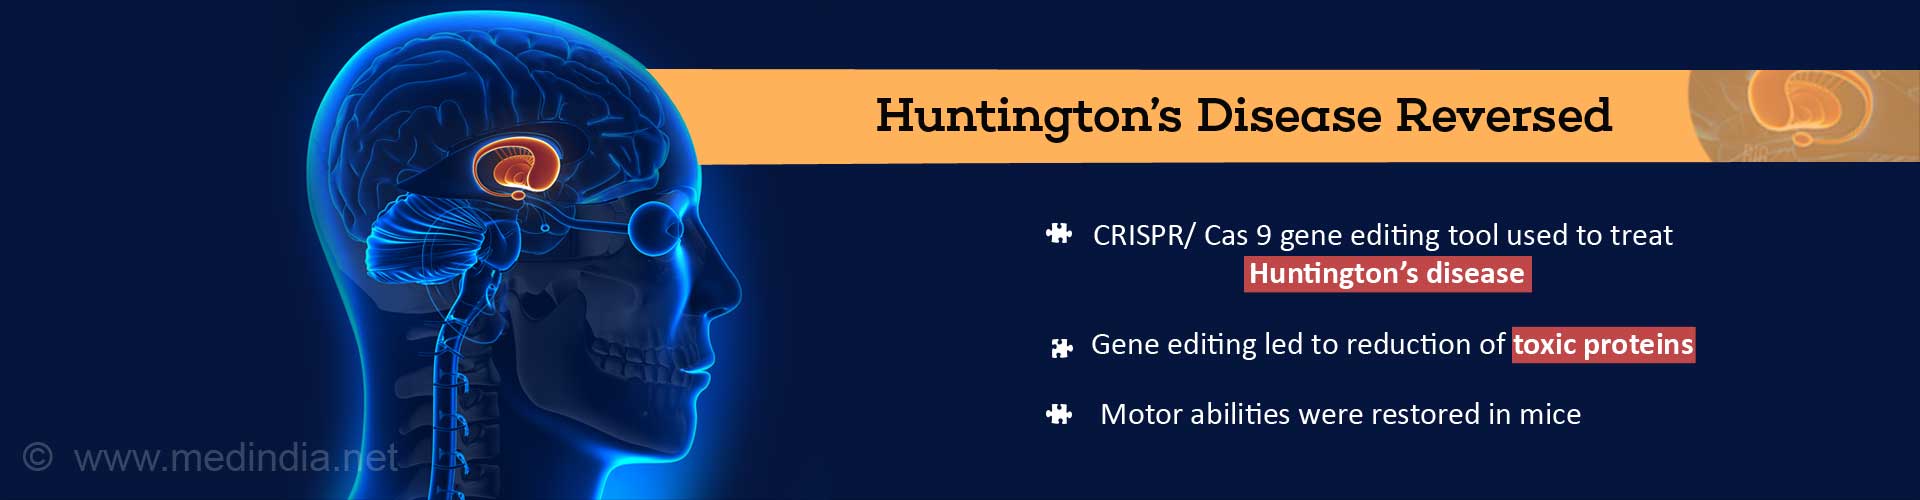 Huntington's Disease Reversed
- CRISPR/Cas 9 gene editing tool used to treat Huntington's Disease
- Gene editing led to reduction of toxic proteins
- Motor abilities were restored in mice
